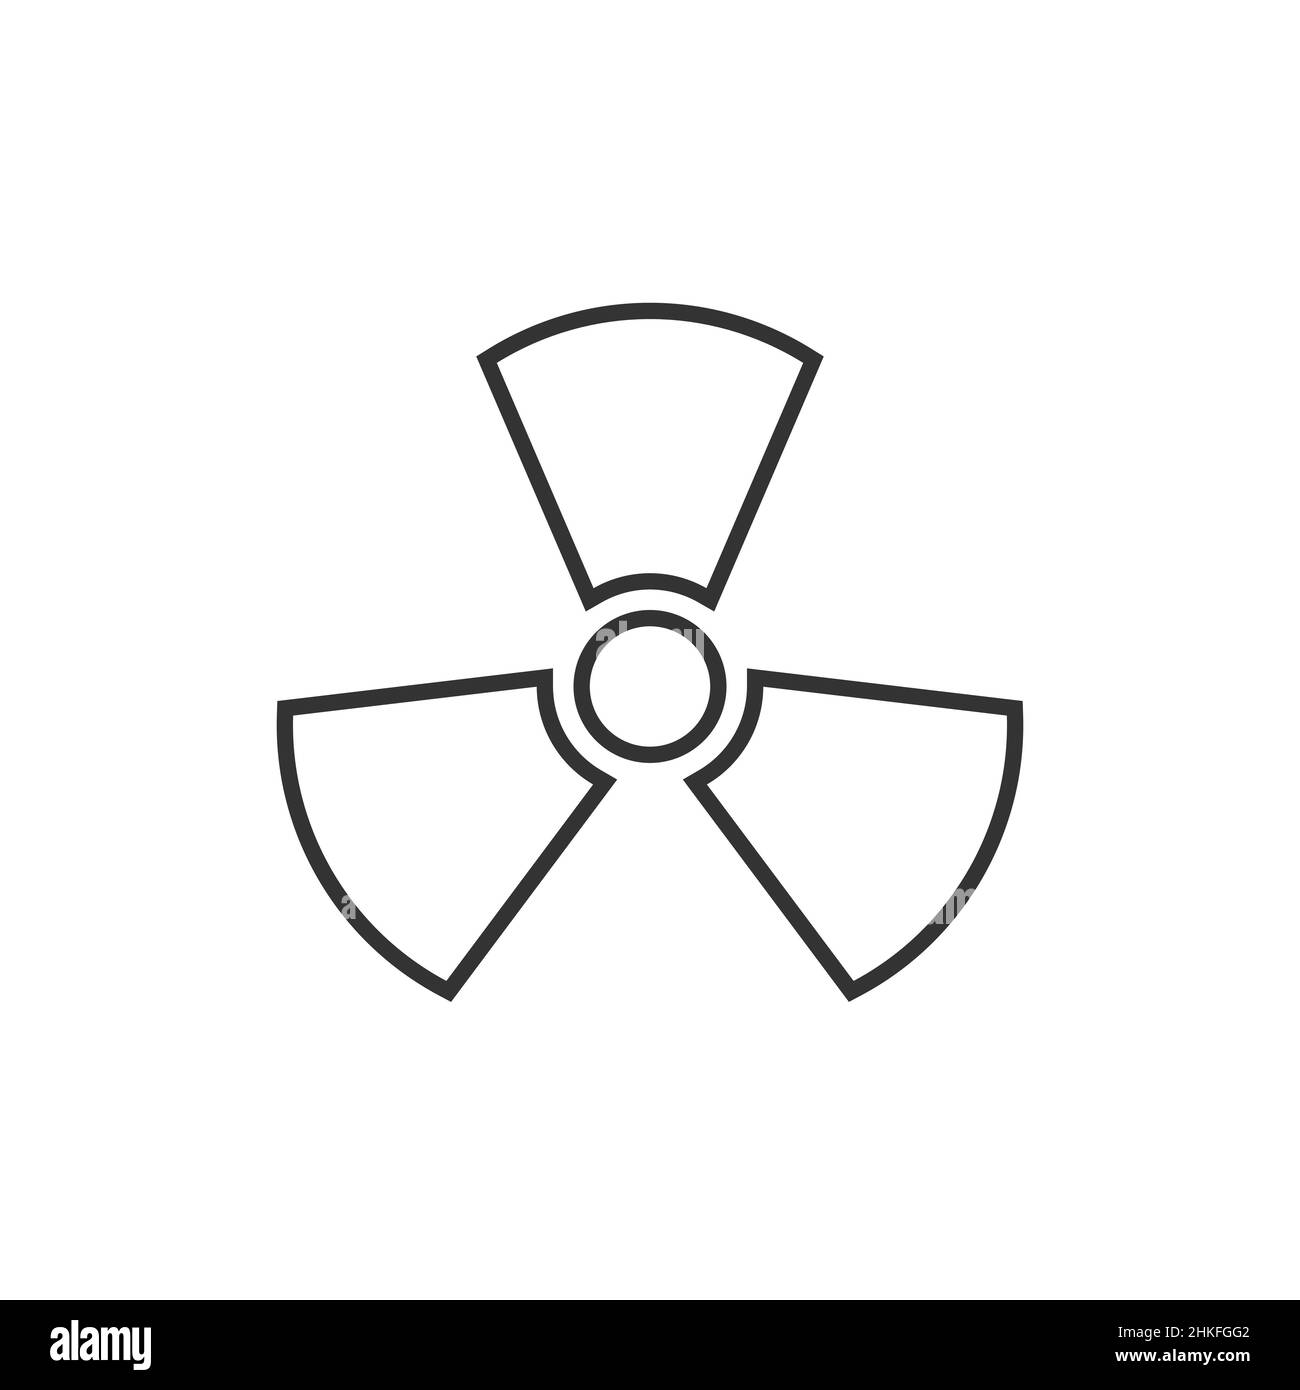 141 Acute Toxicity Symbol Images, Stock Photos, 3D objects